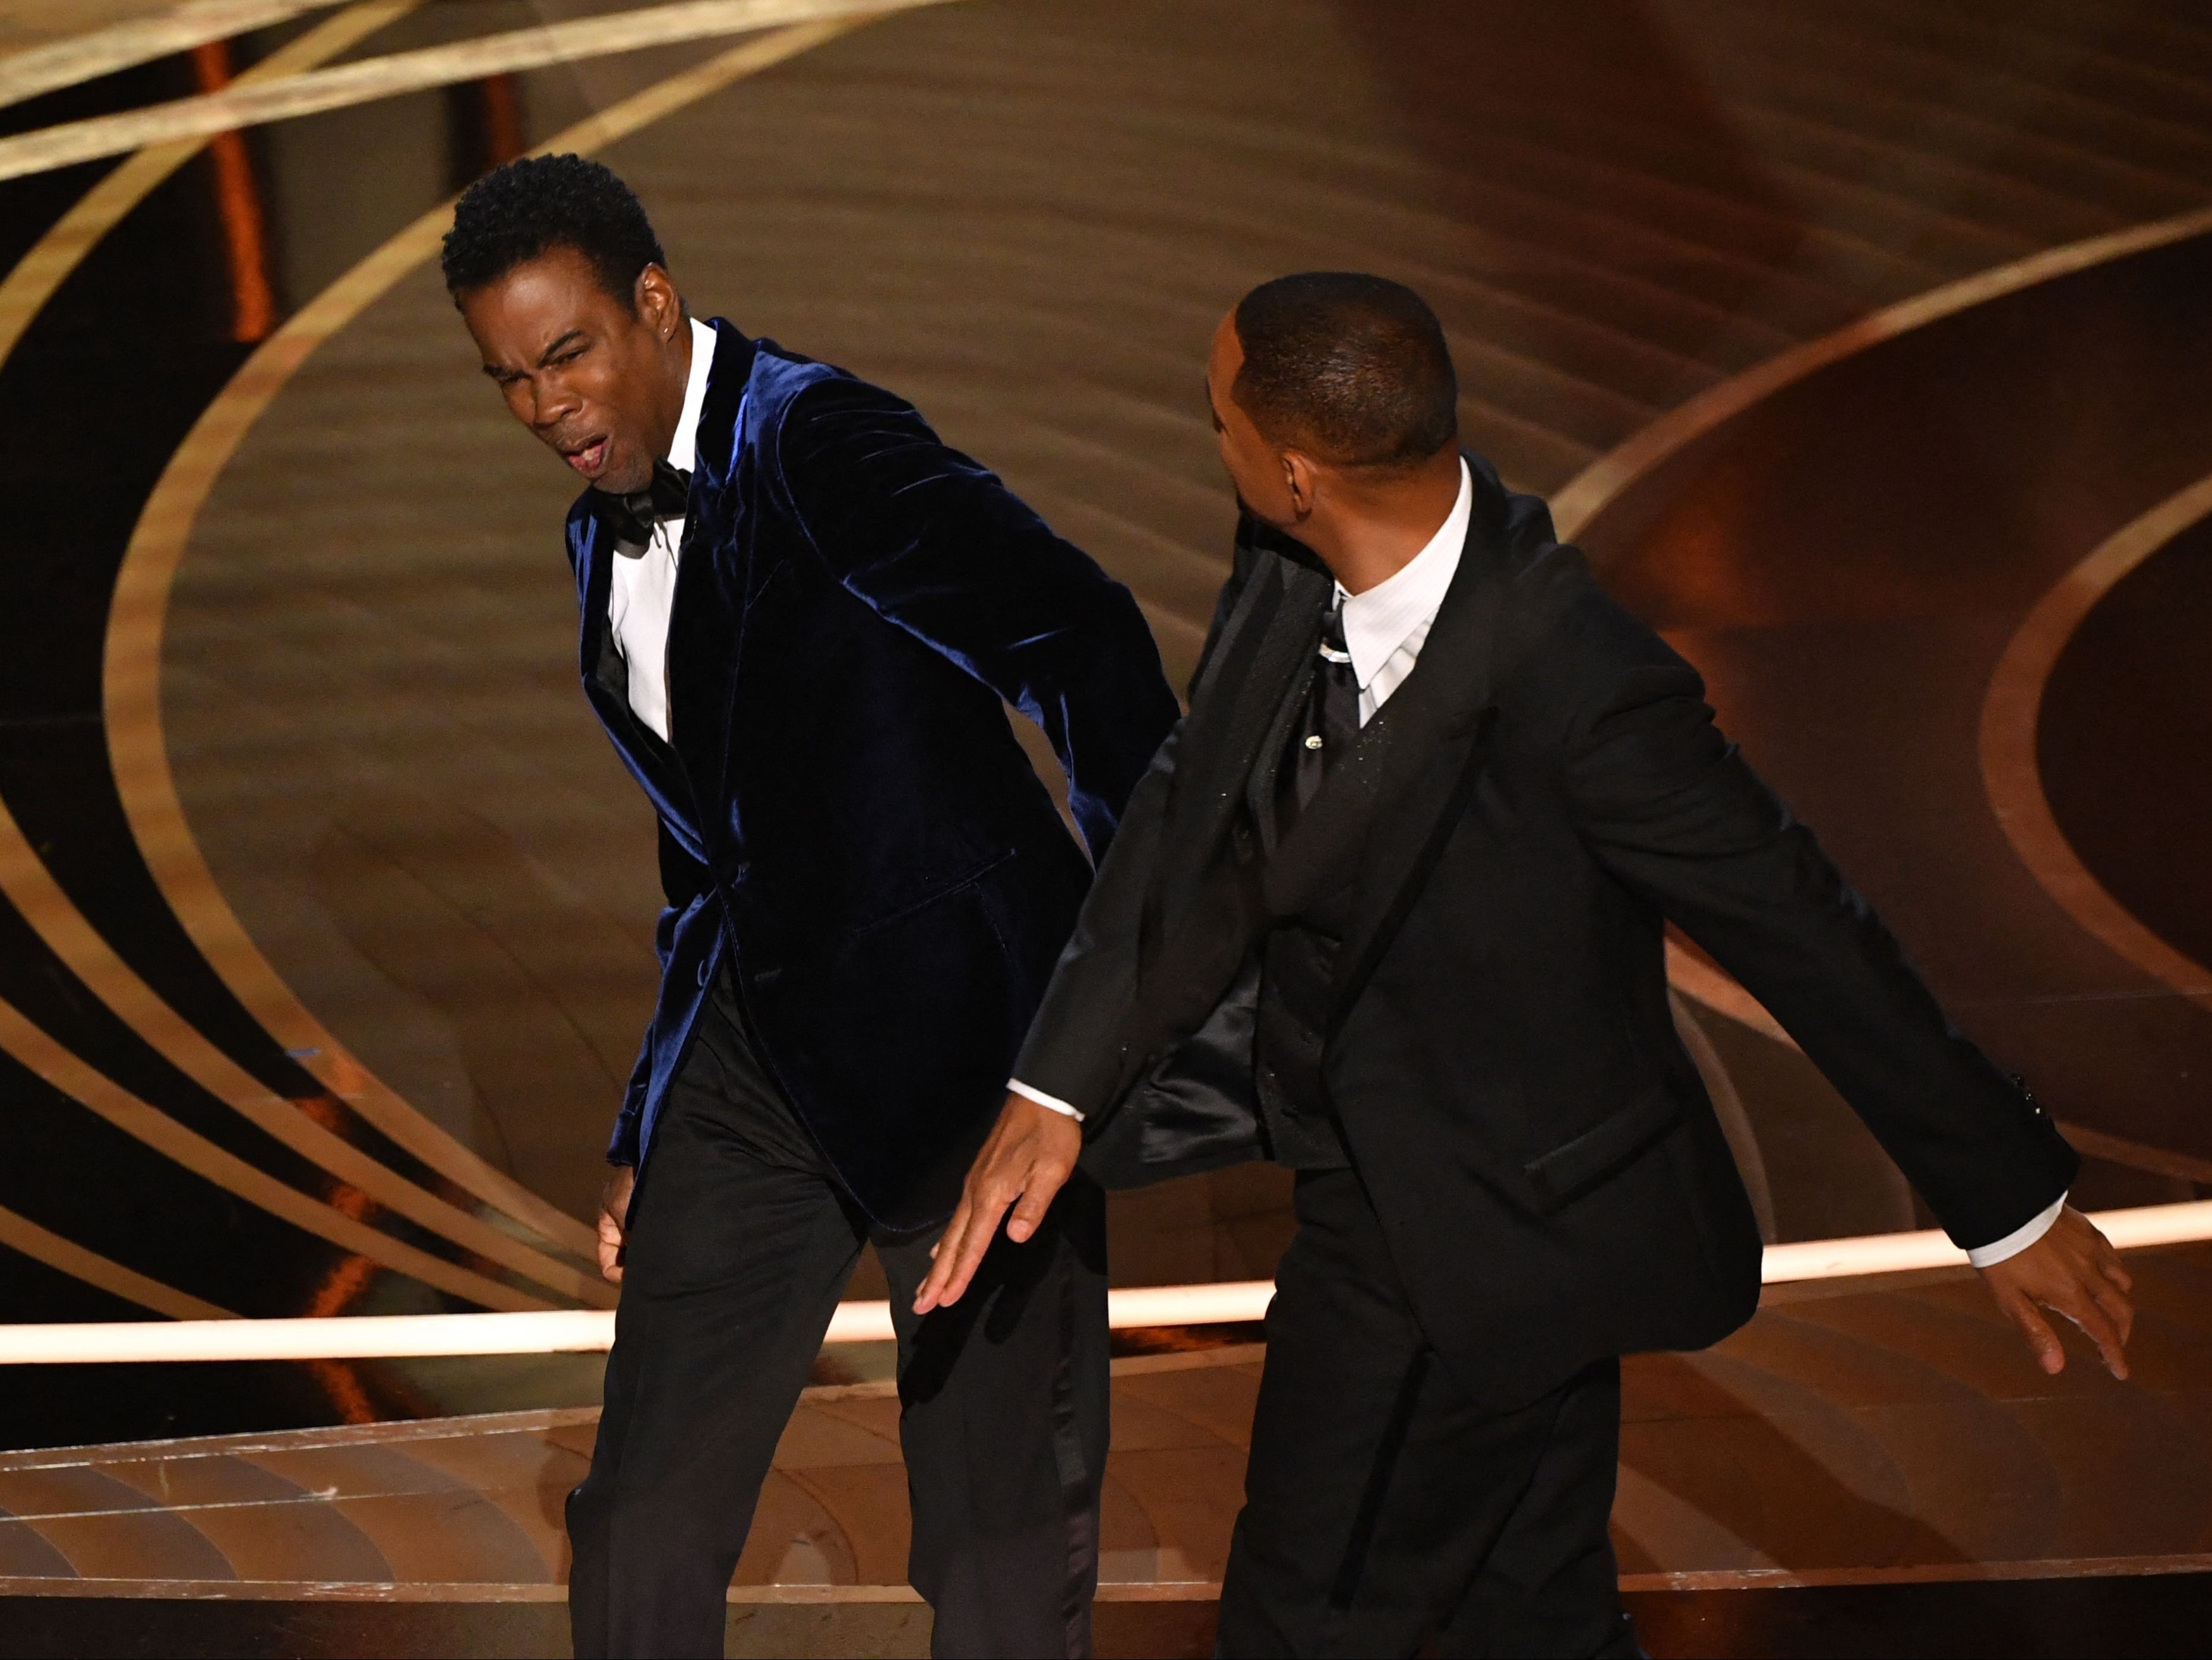 Will Smith and Chris Rock on stage during the 94th Oscars